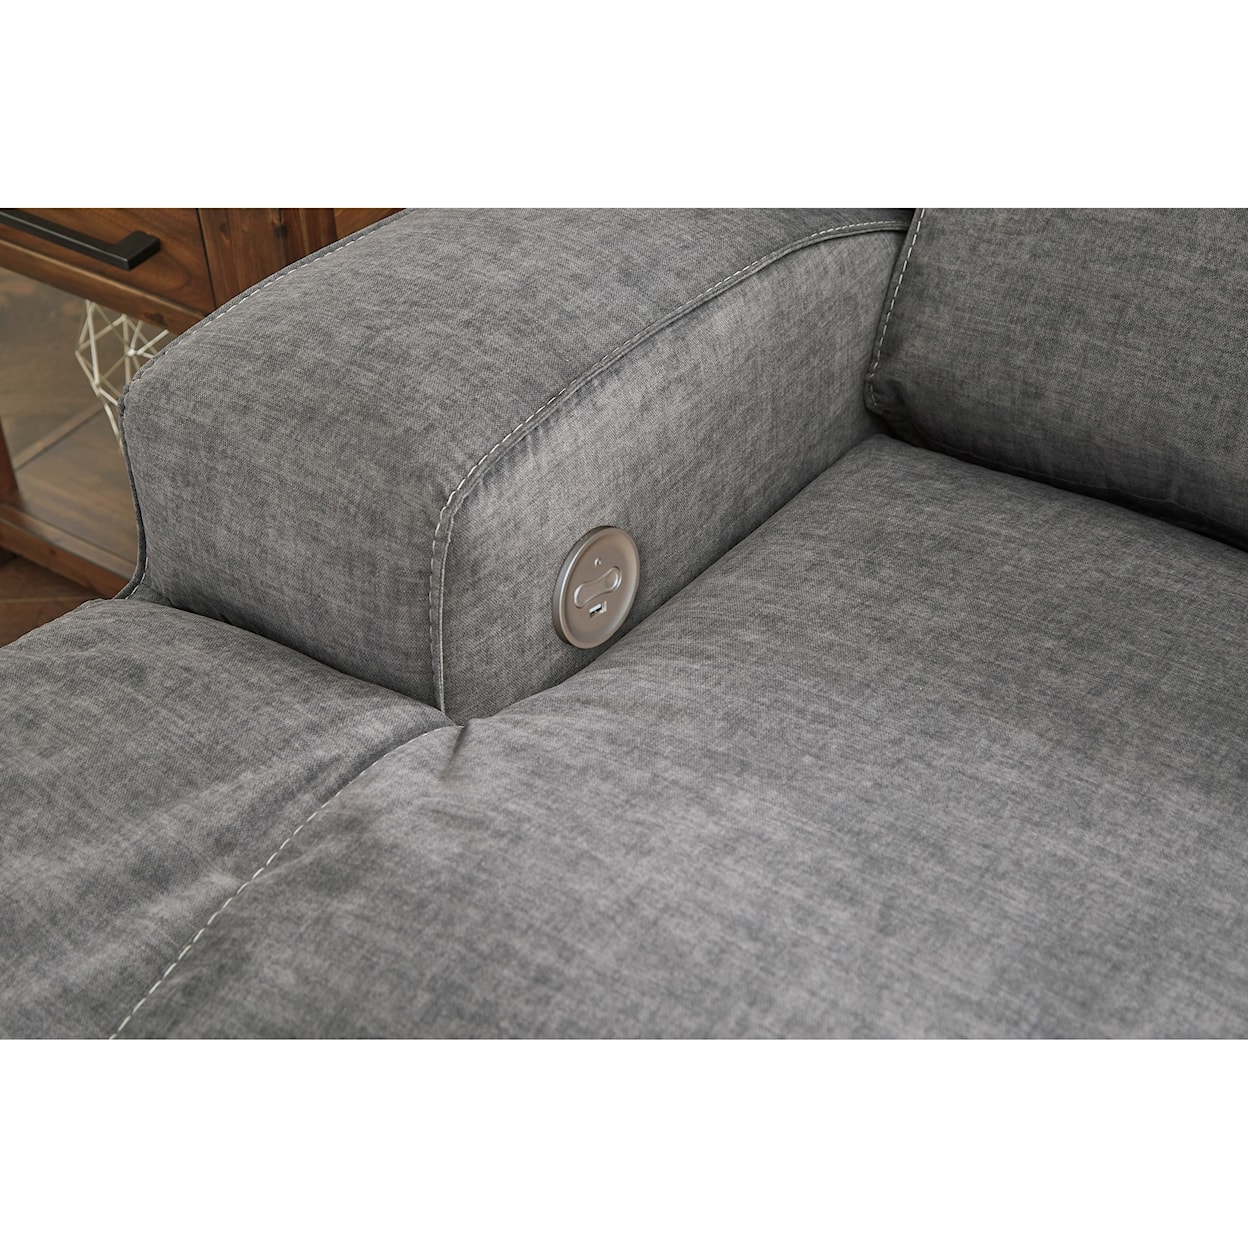 Benchcraft Coombs Double Reclining Power Loveseat w/ Console